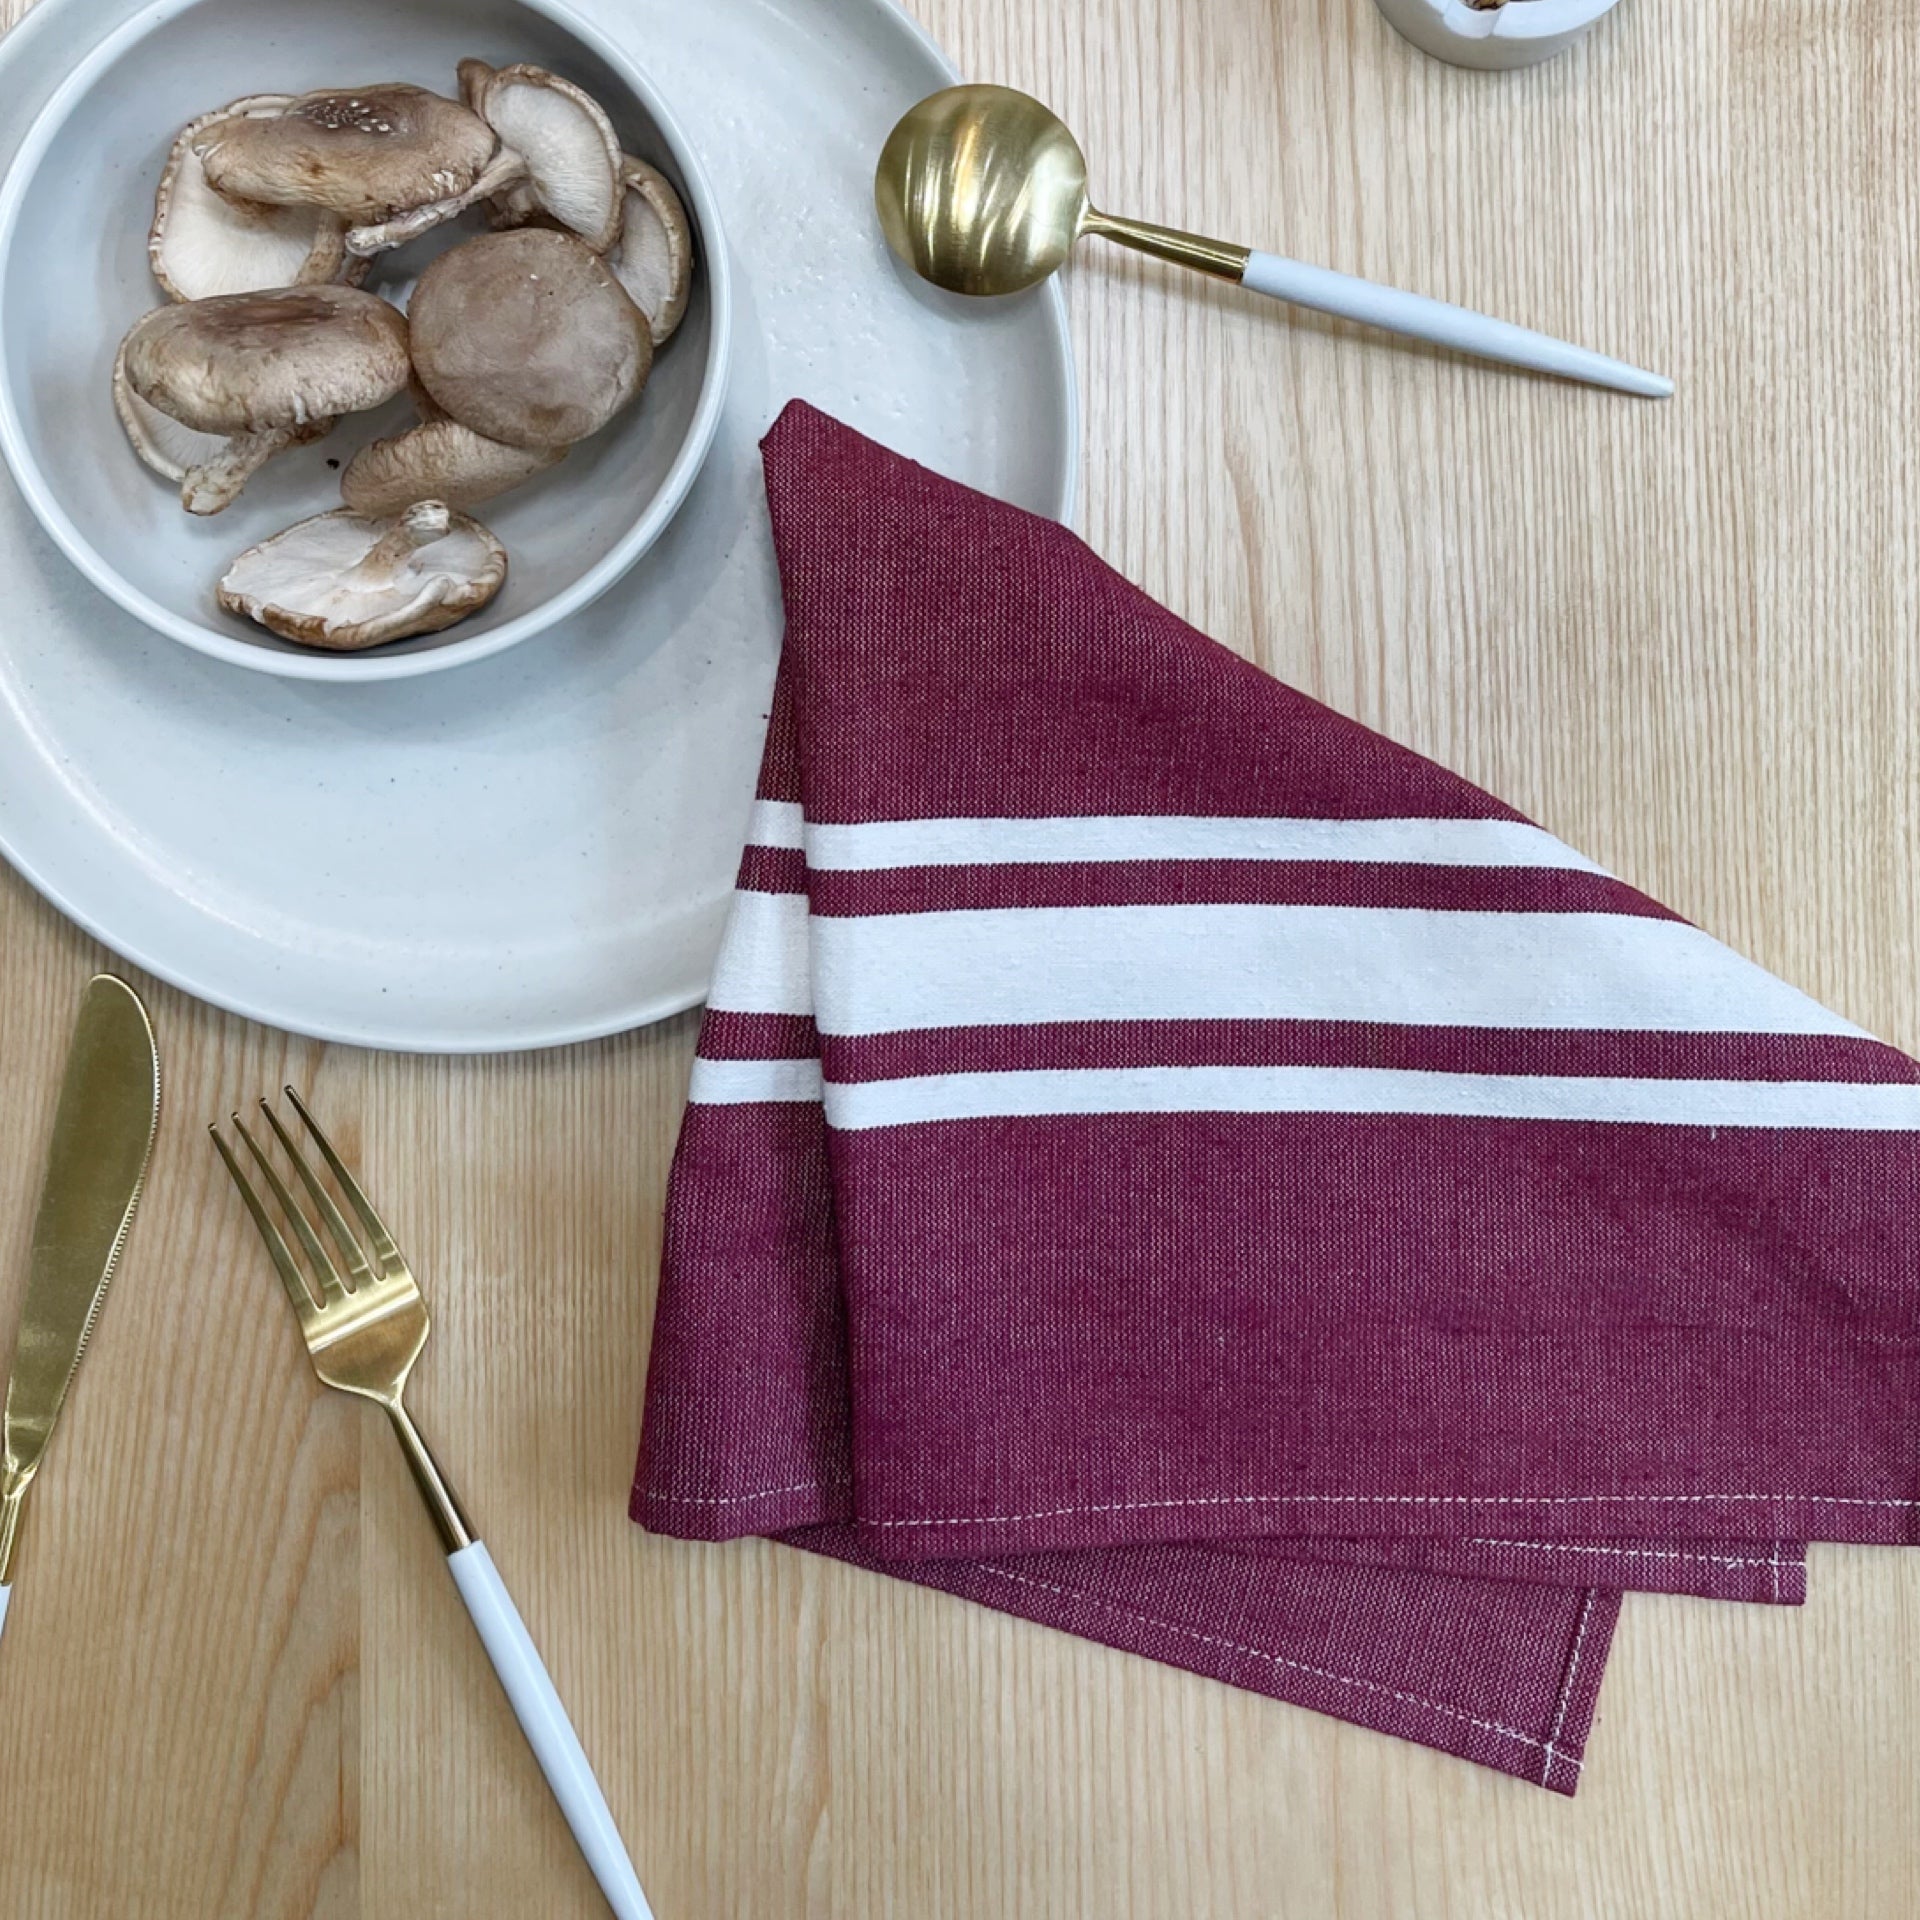 Jamil Handwoven Napkin (Set of 2) - Ruby Red